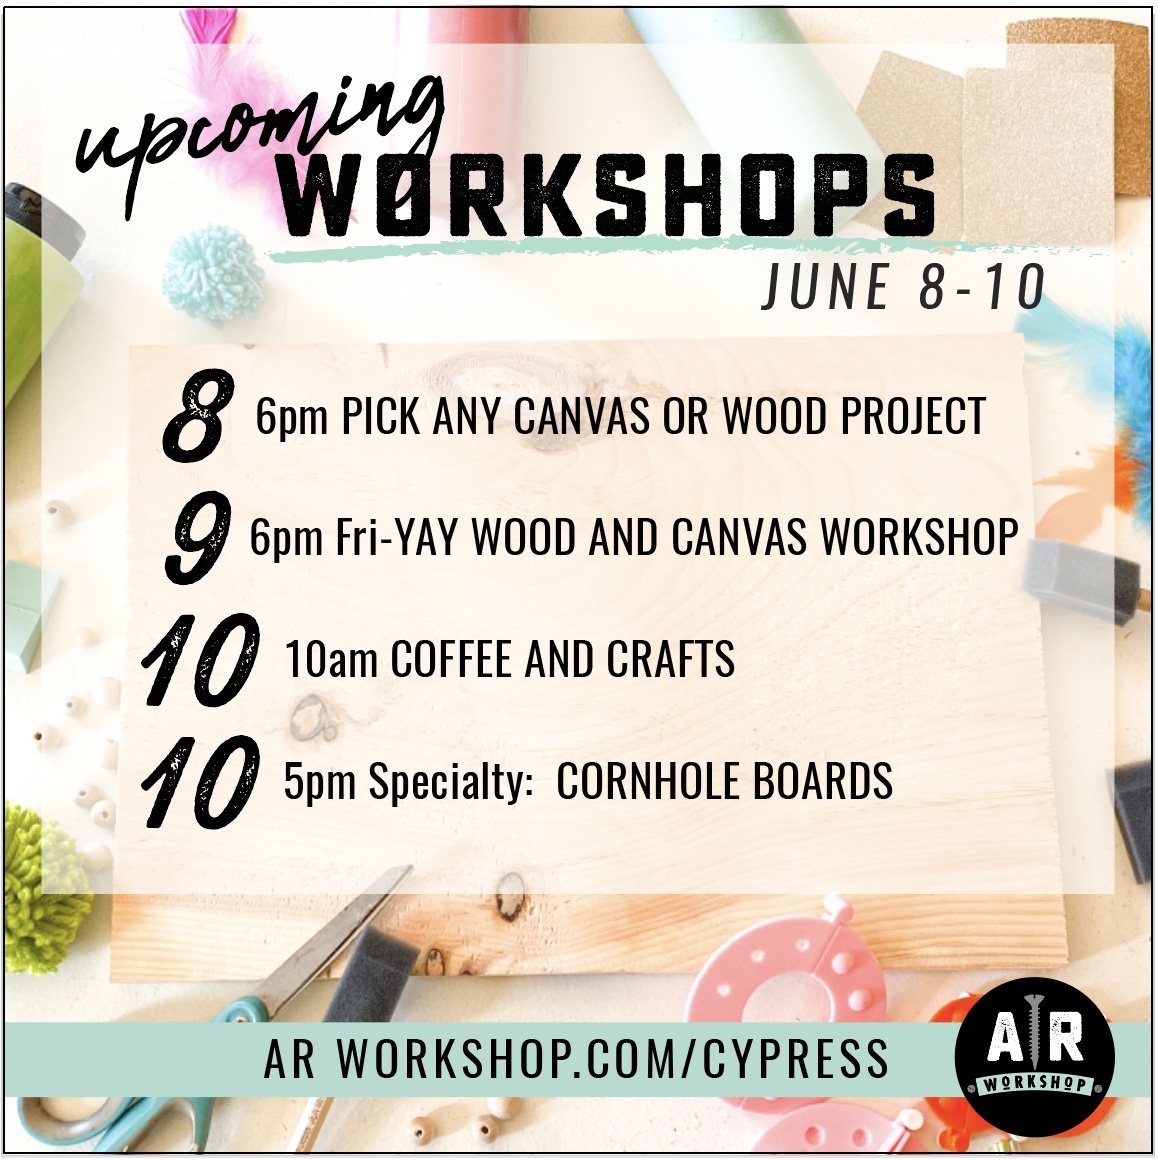 Make something special this week! Register: arworkshop.com/cypress/#sched…

Ask us about custom quote and design options for your next project!

#workshop #woodworkshop #woodsign #customsign #customwoodsigns #diydecor #diysign #diyhomedecor #diyprojects #gno #nightout #familytime...